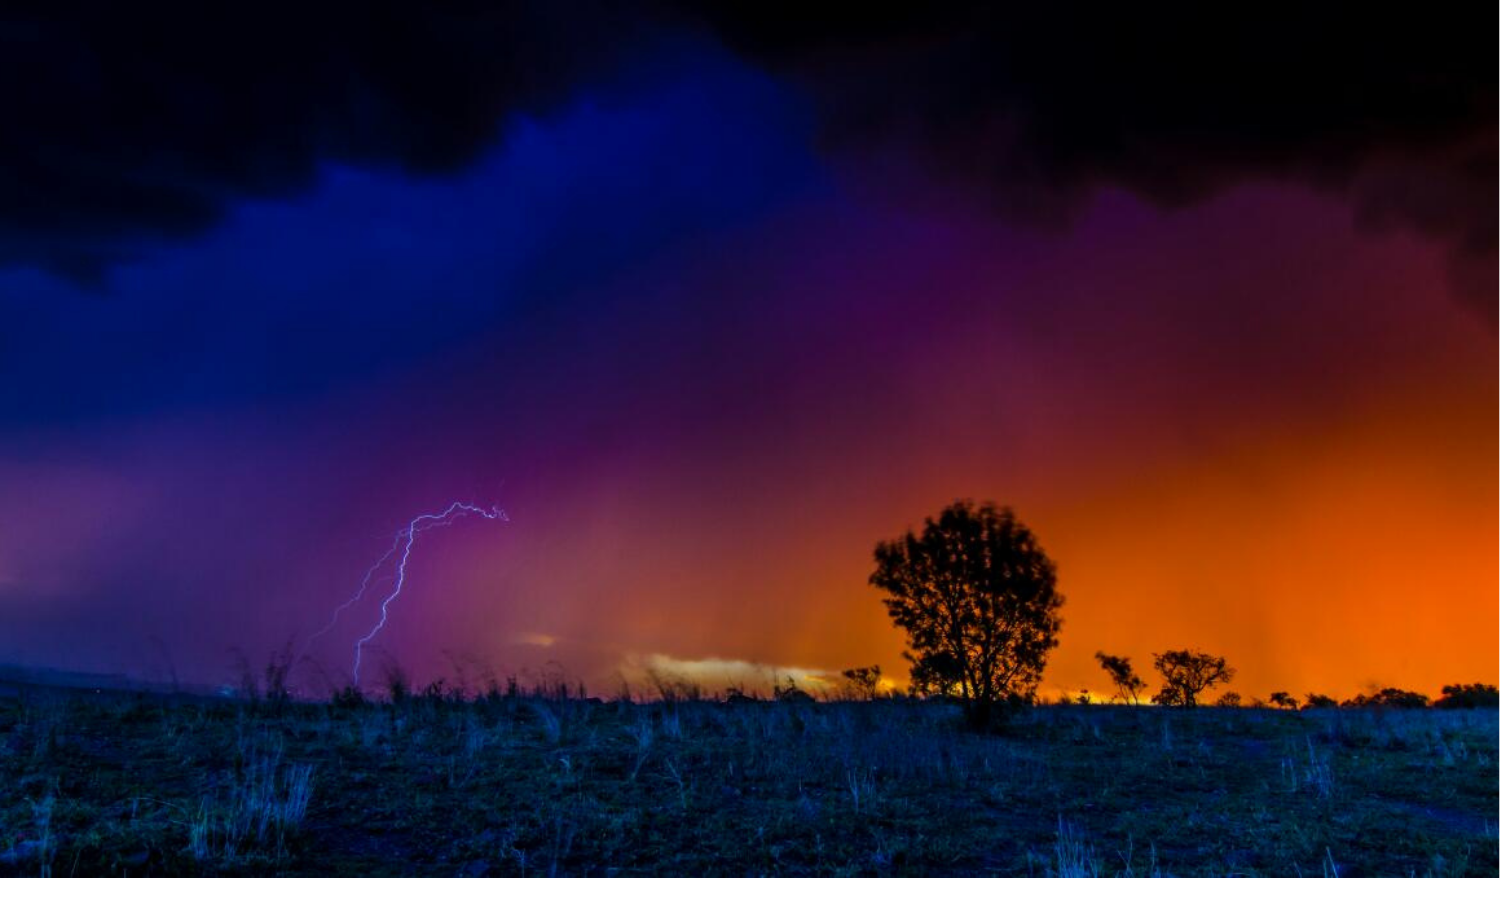 Fire at night by Shane Rorke